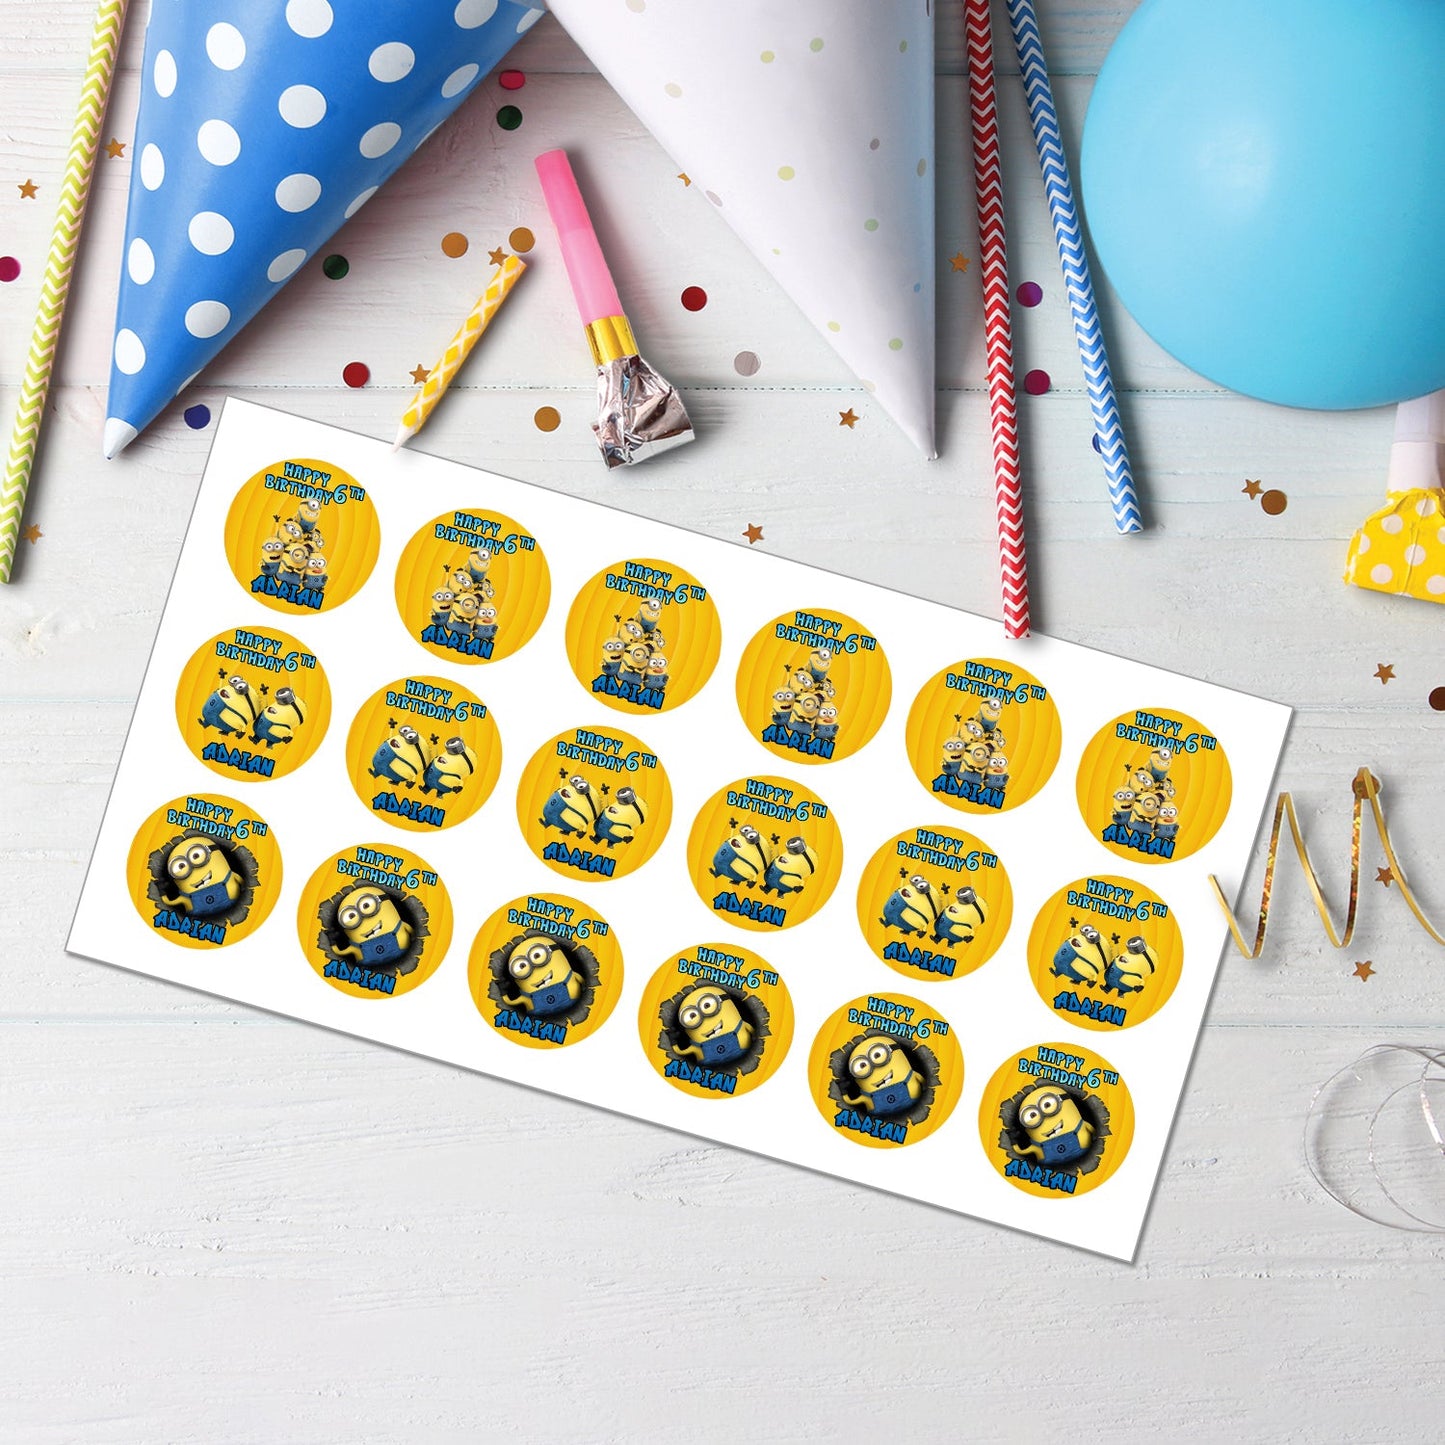 Delight Your Guests with Minion Personalized Cupcakes Toppers